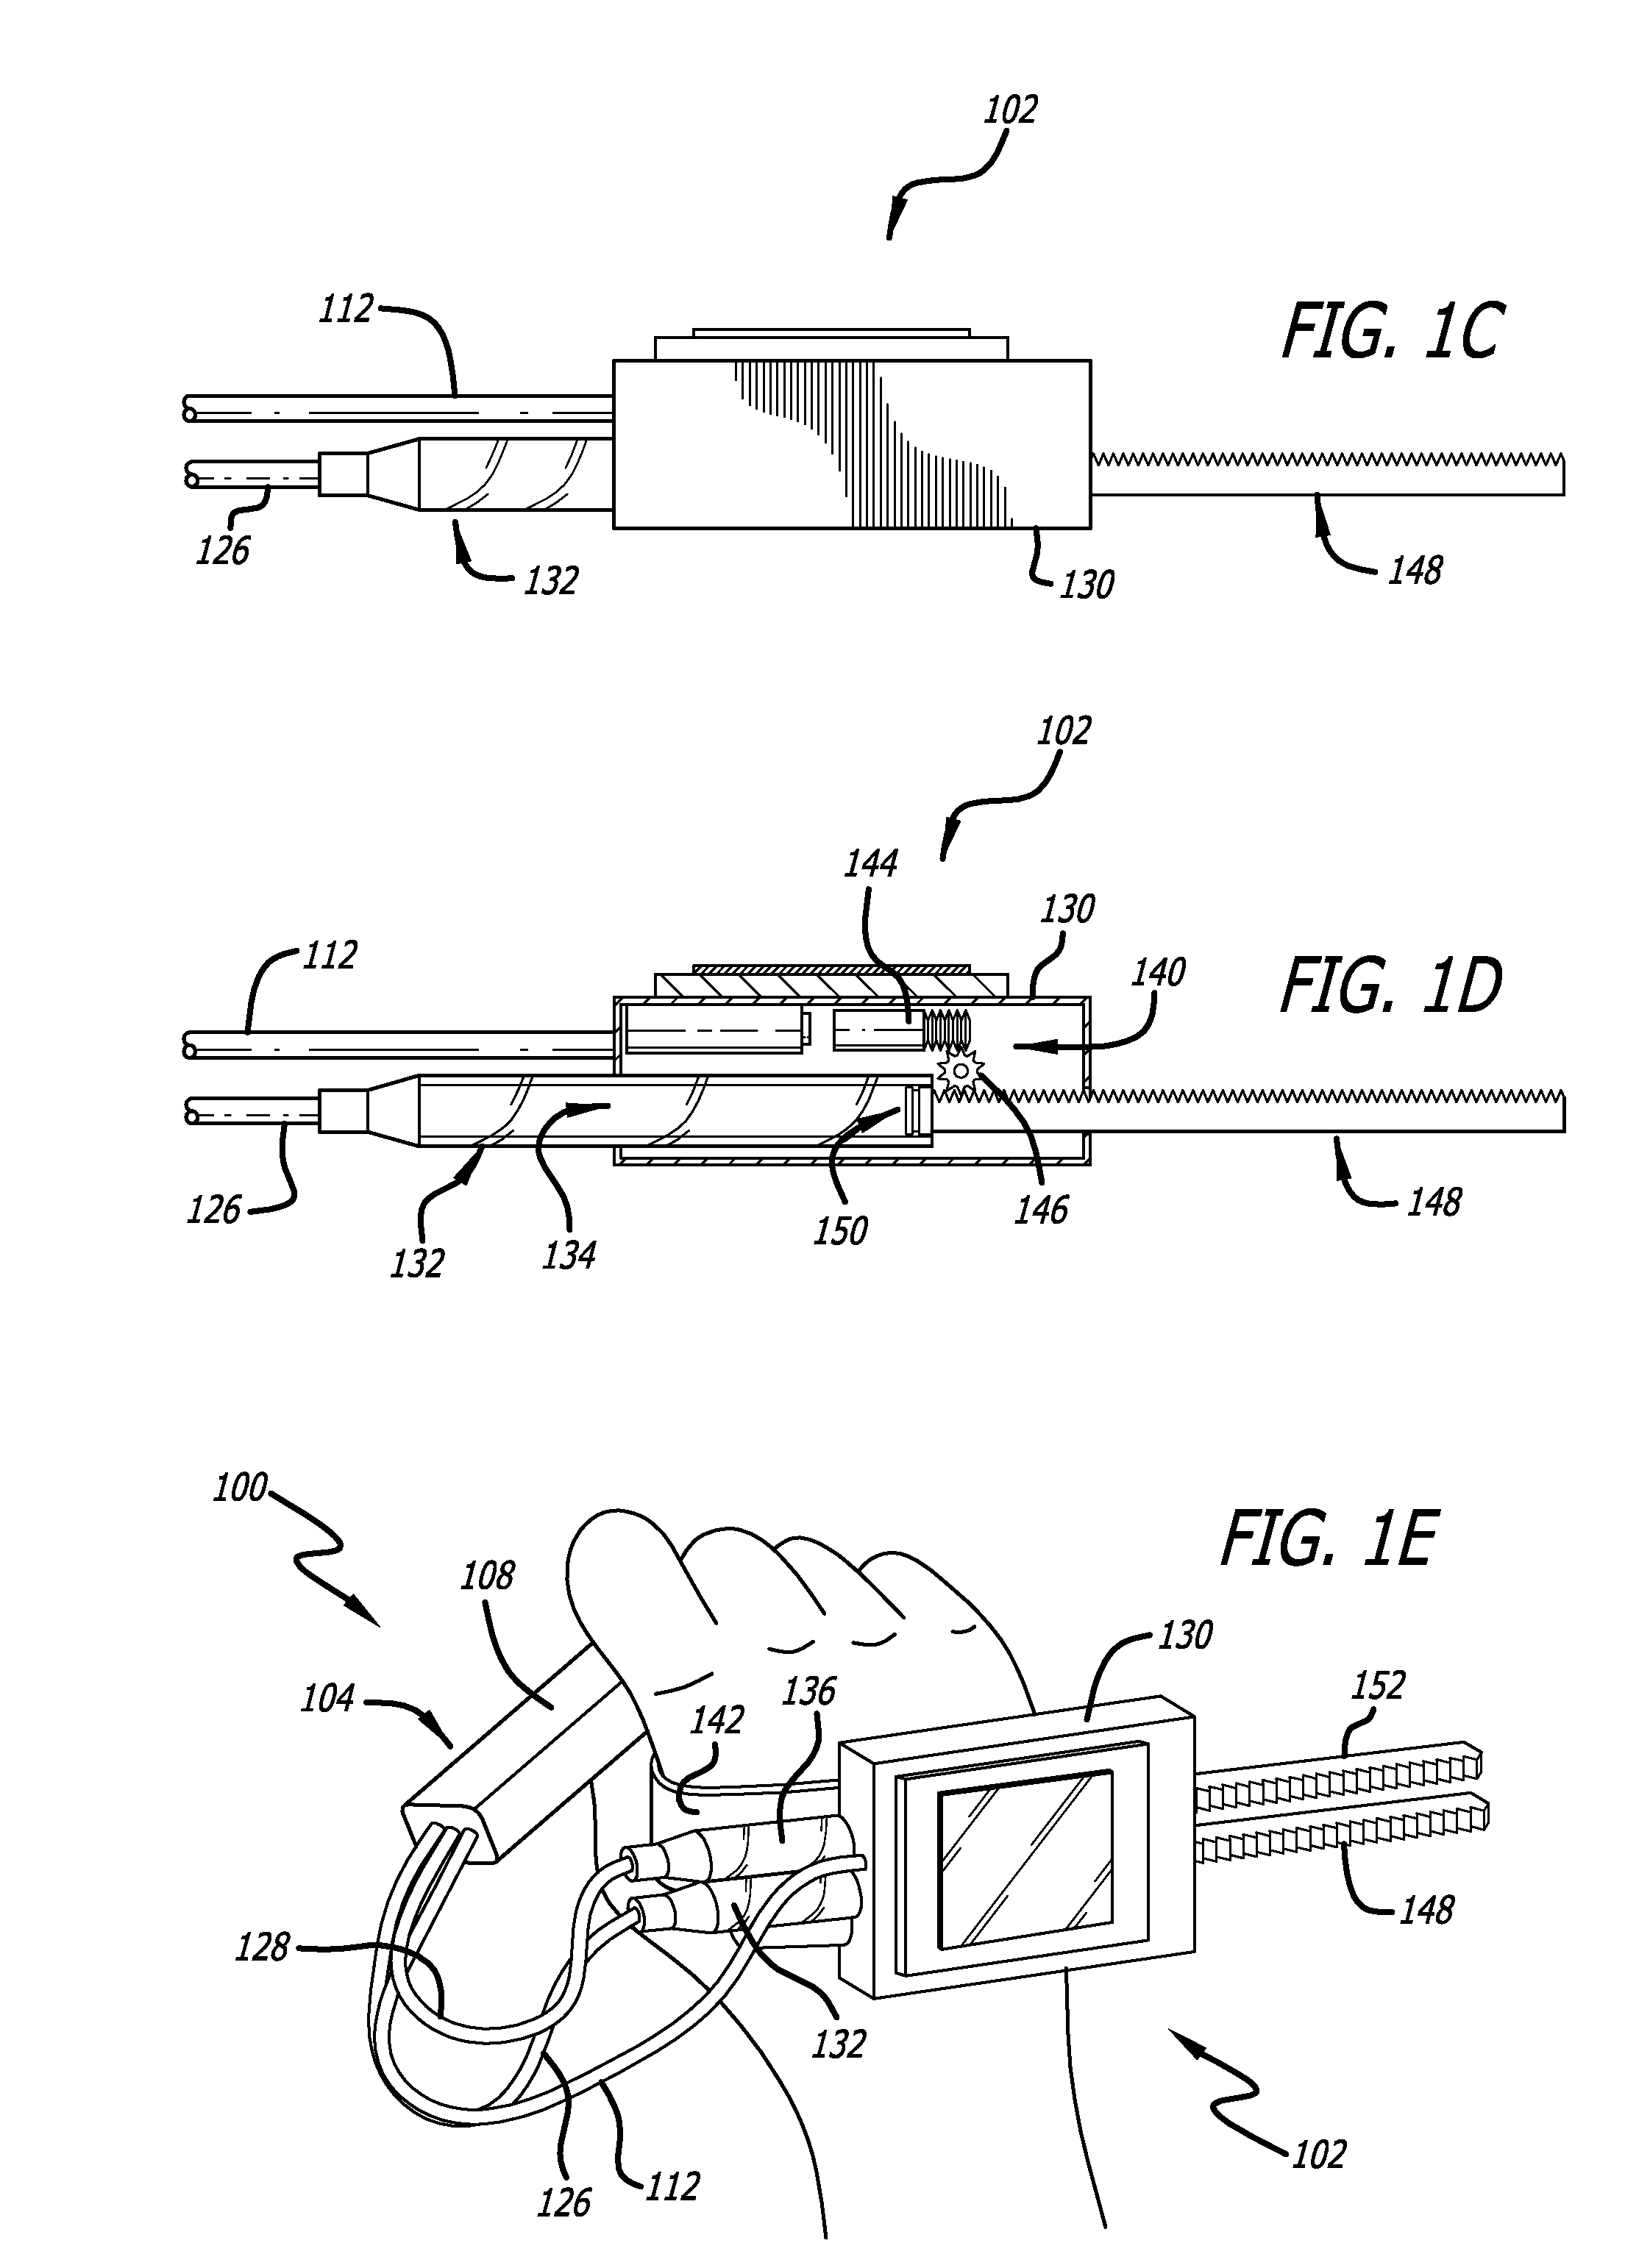 Modular injection system and method for diluting an injectable fluid